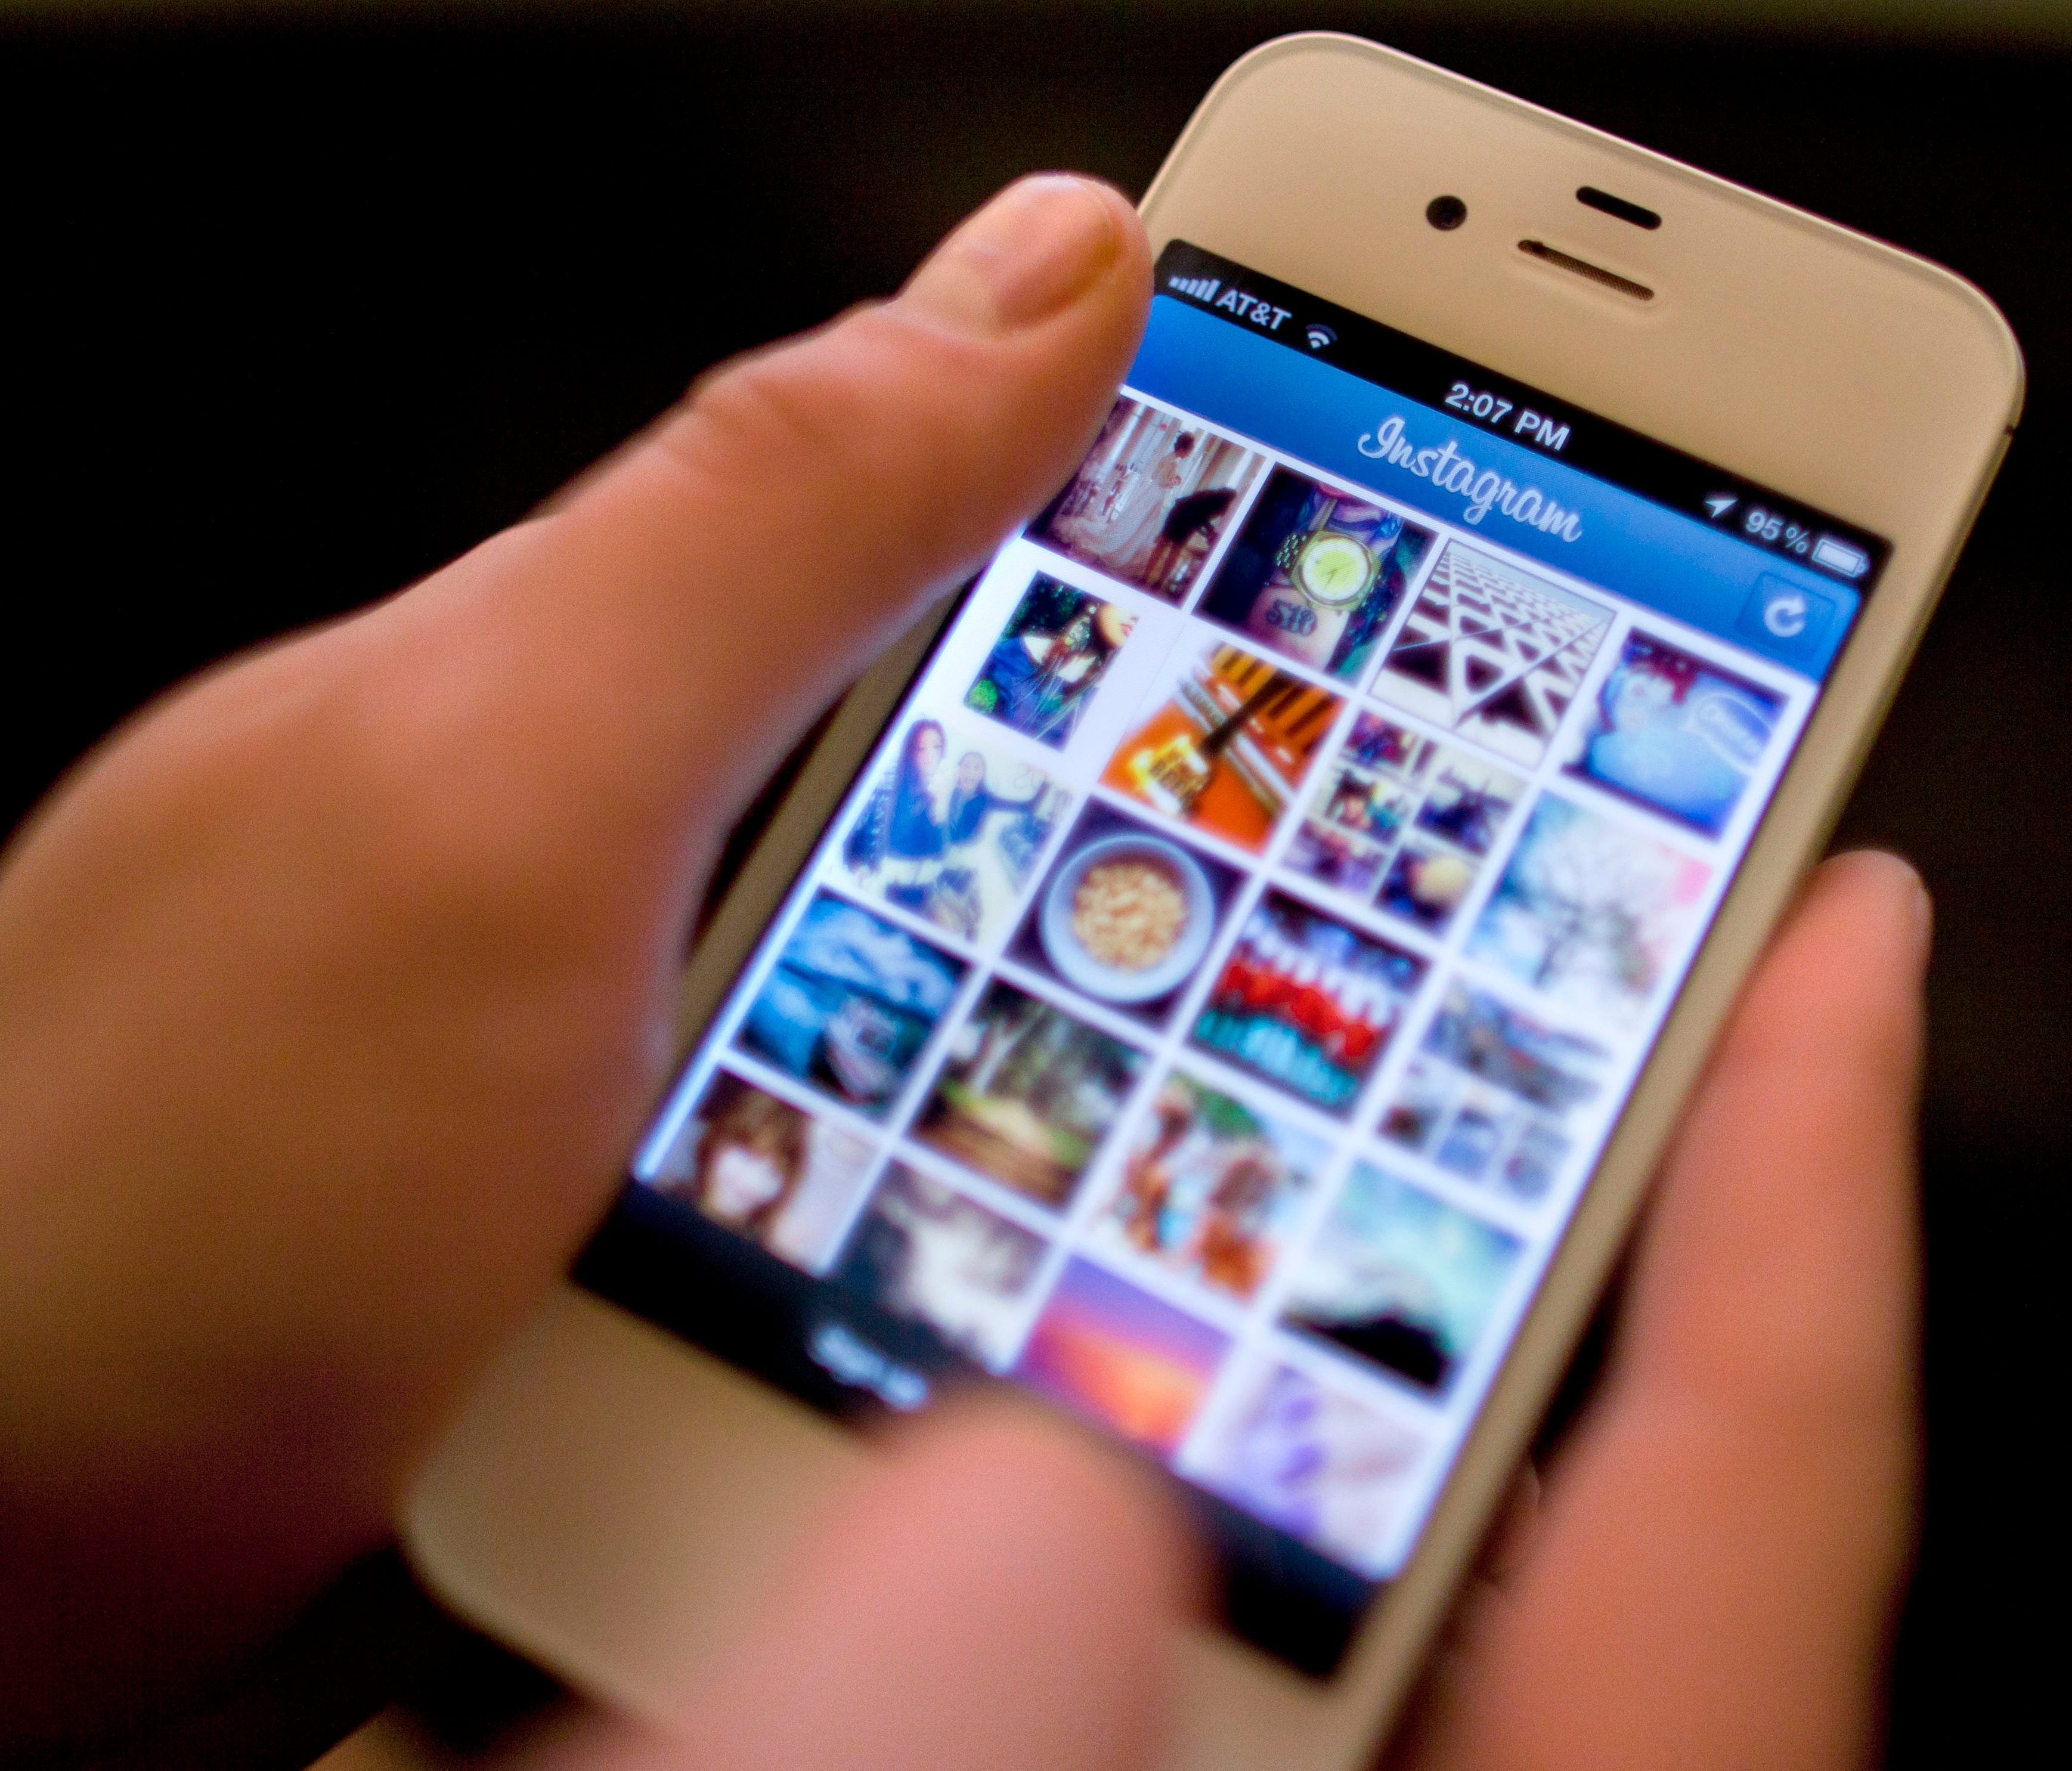 Instagram has become the main platform for sharing pictures, with more than 34 billion pictures posted as of 2016.